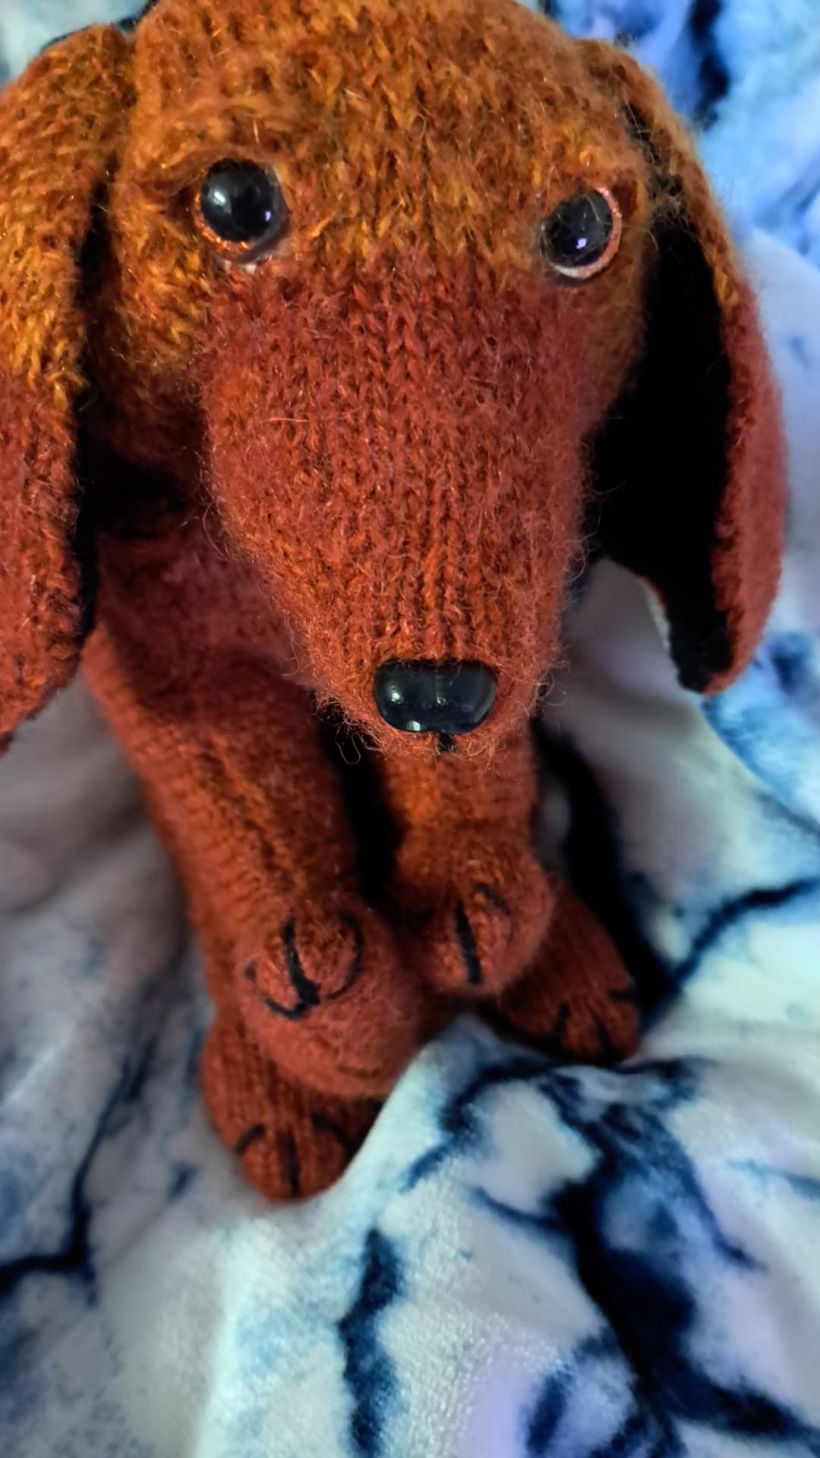 My project for course: Knitting Realistic Stuffed Animals: Make a Puppy from Yarn 1